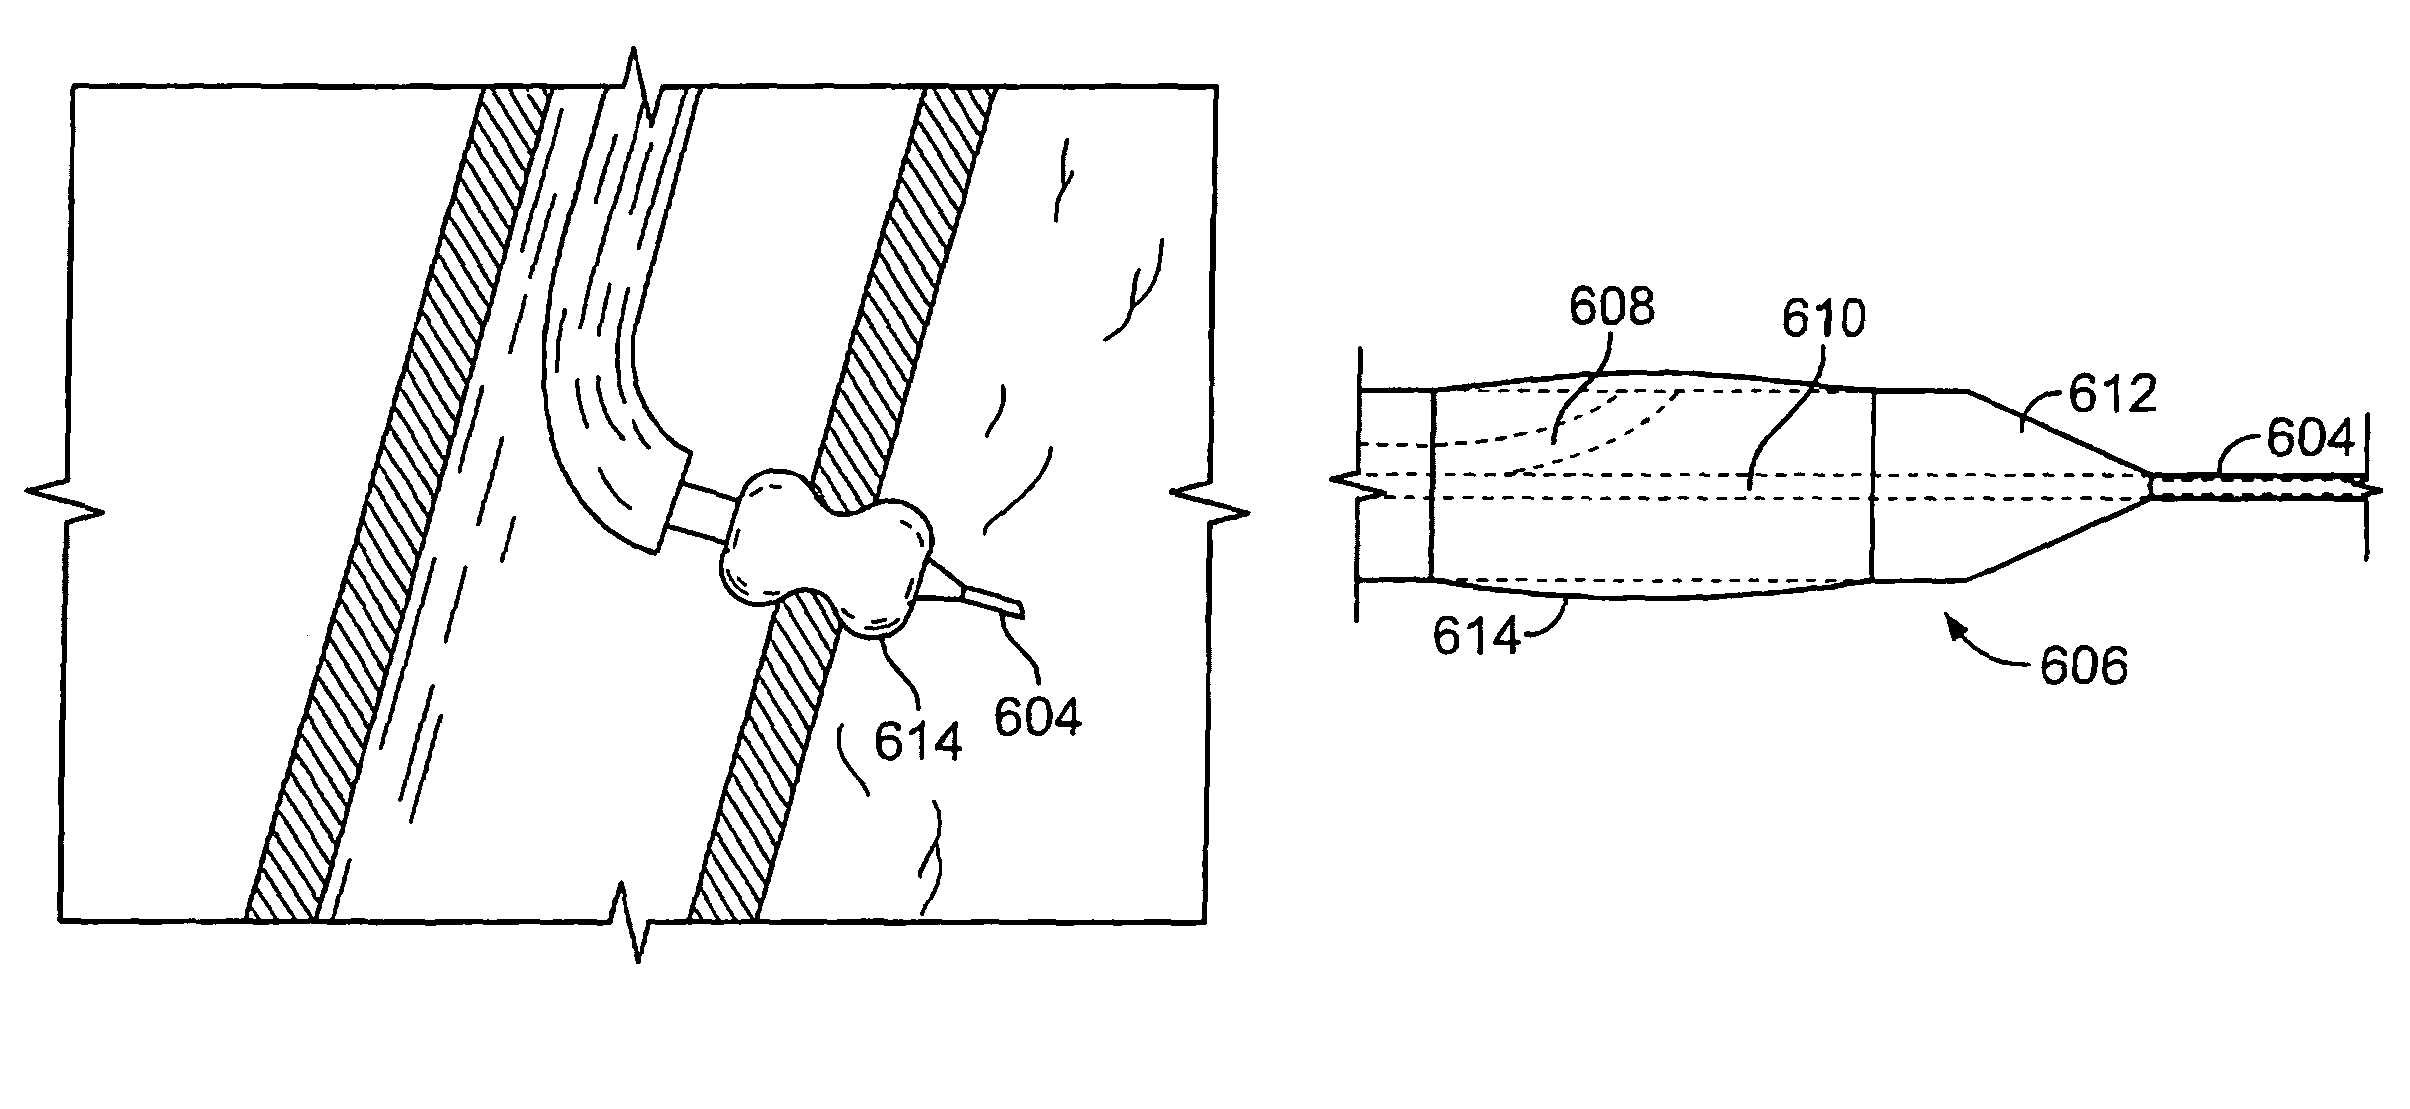 Devices for maintaining patency of surgically created channels in tissue